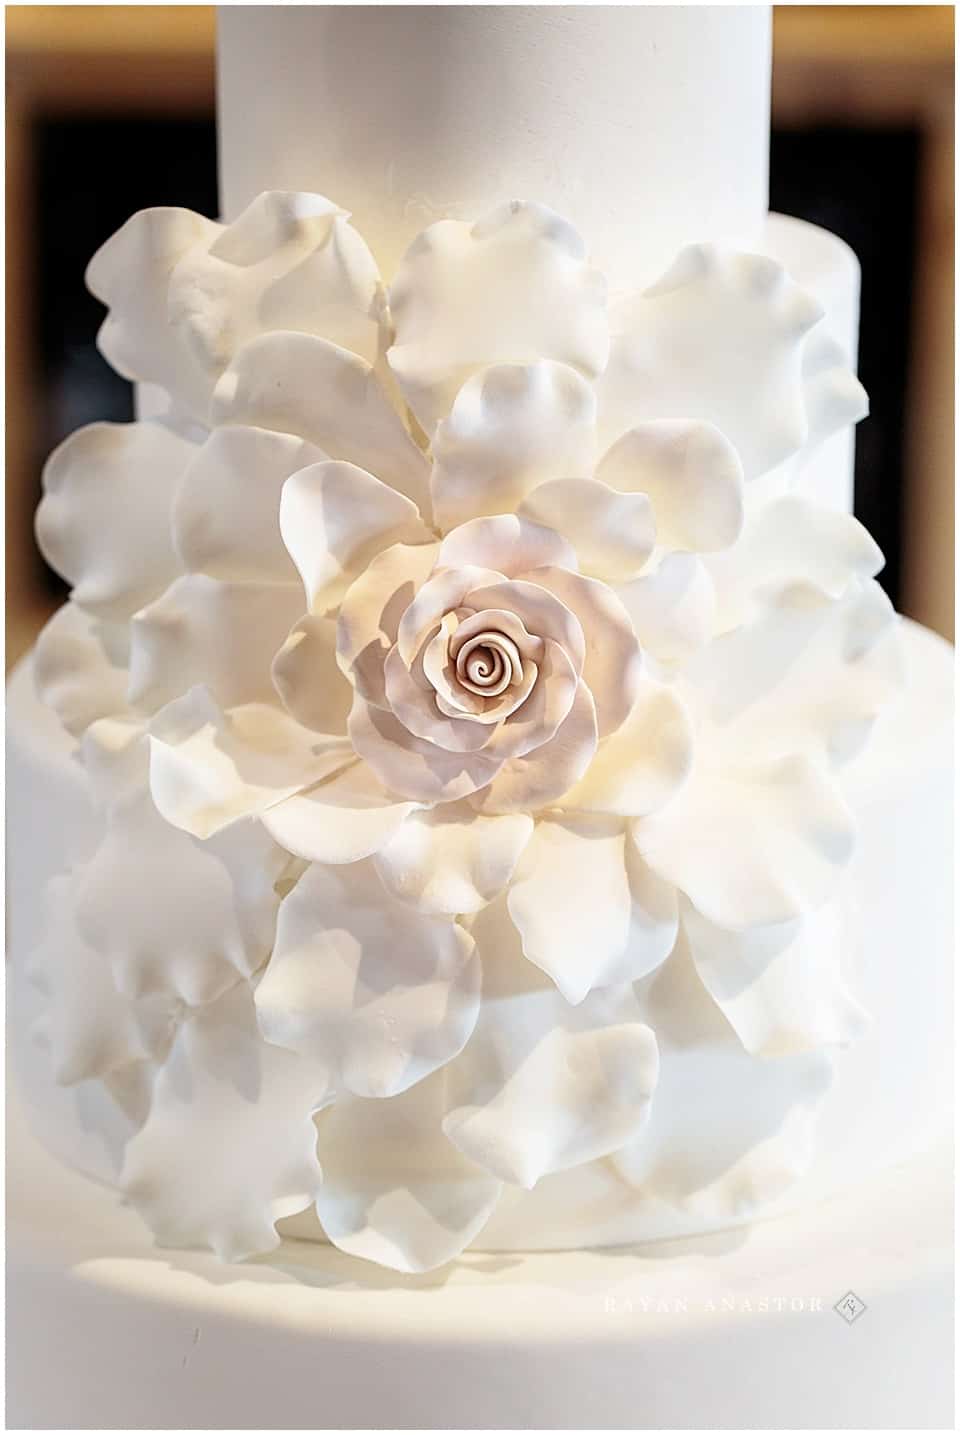 Incredible Cake by Bella E Dolce White with pink flower